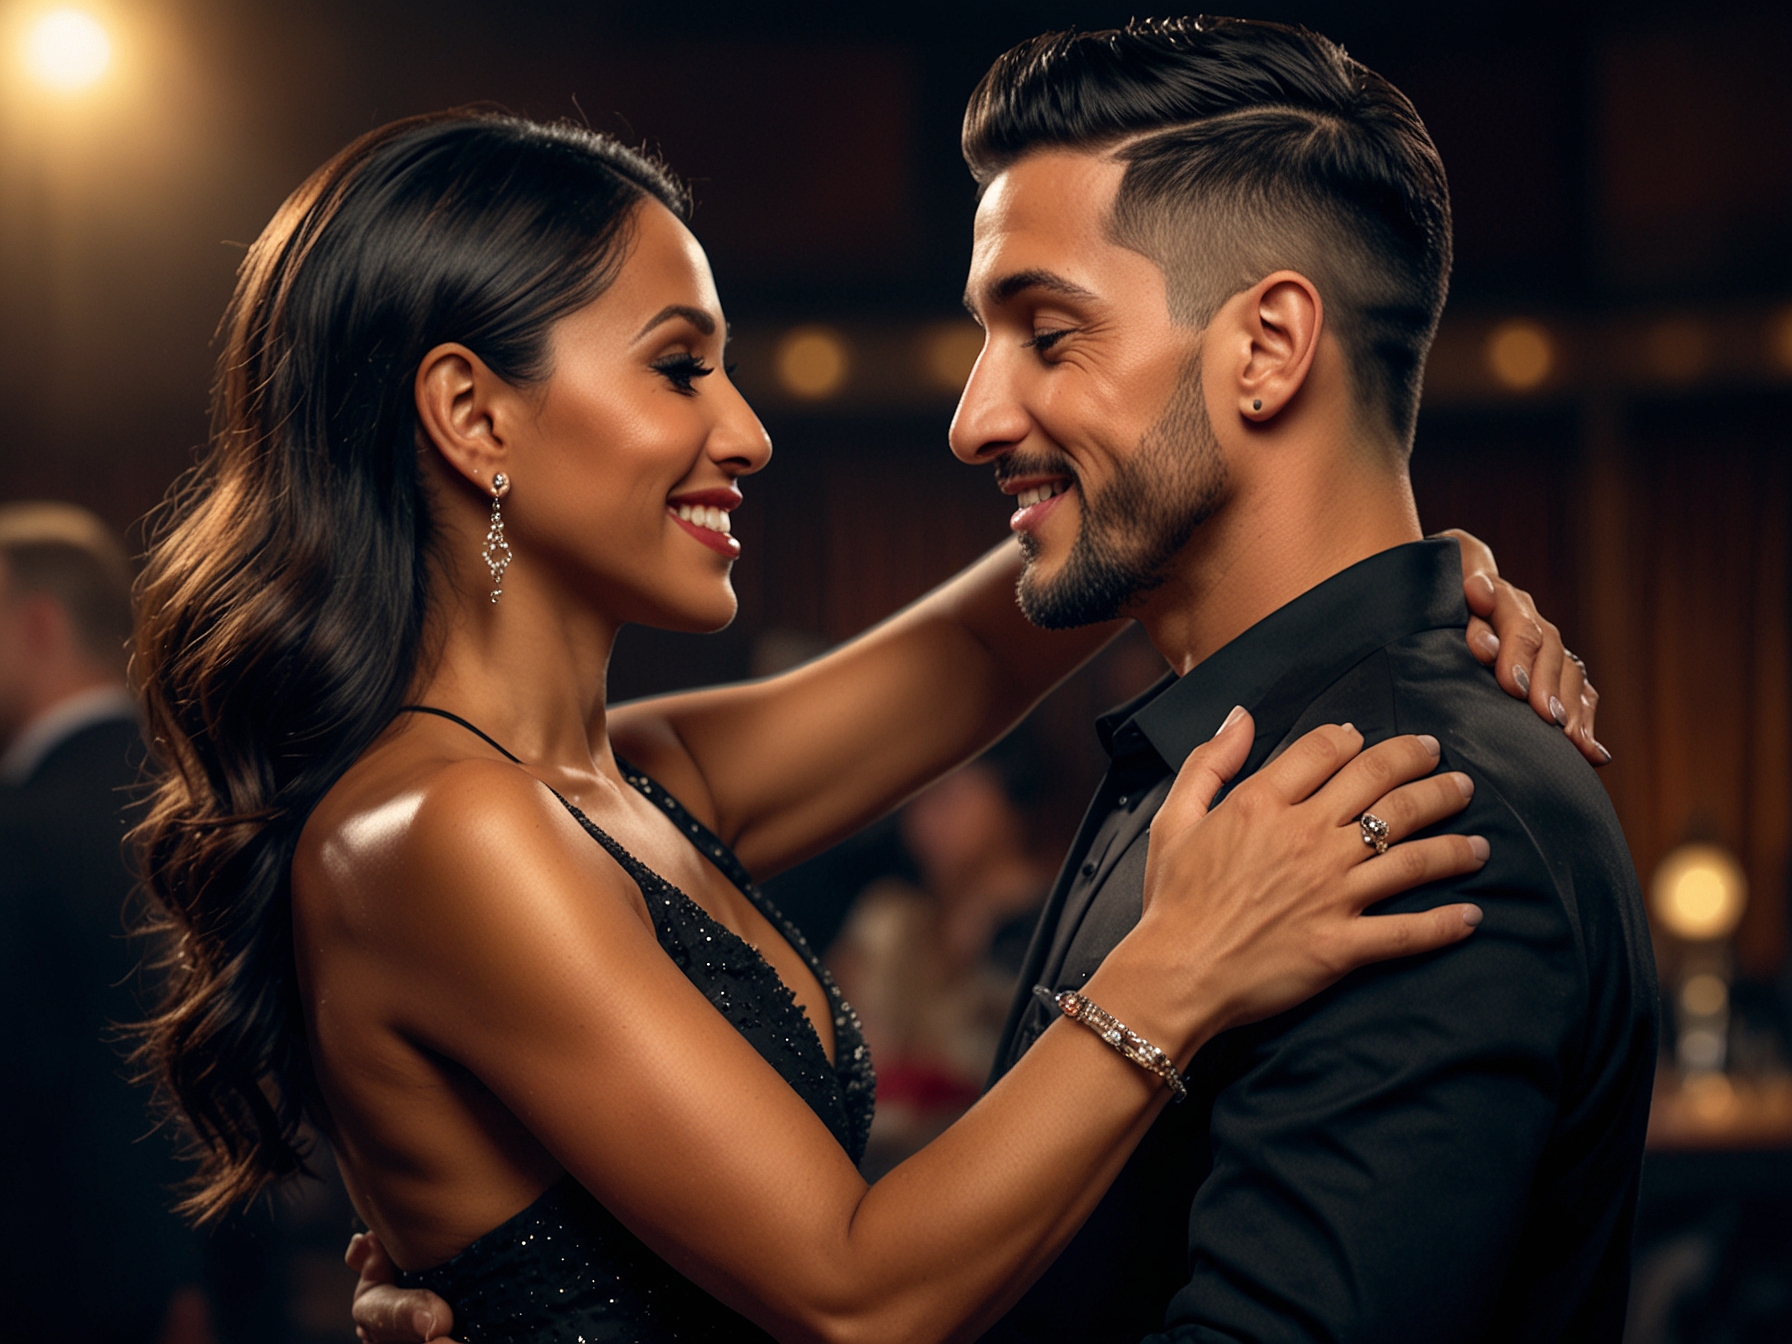 Giovanni Pernice and Karen Hauer sharing a candid moment backstage at 'Strictly Come Dancing,' reflecting their strong professional bond and the shock surrounding the misconduct probe affecting Pernice.